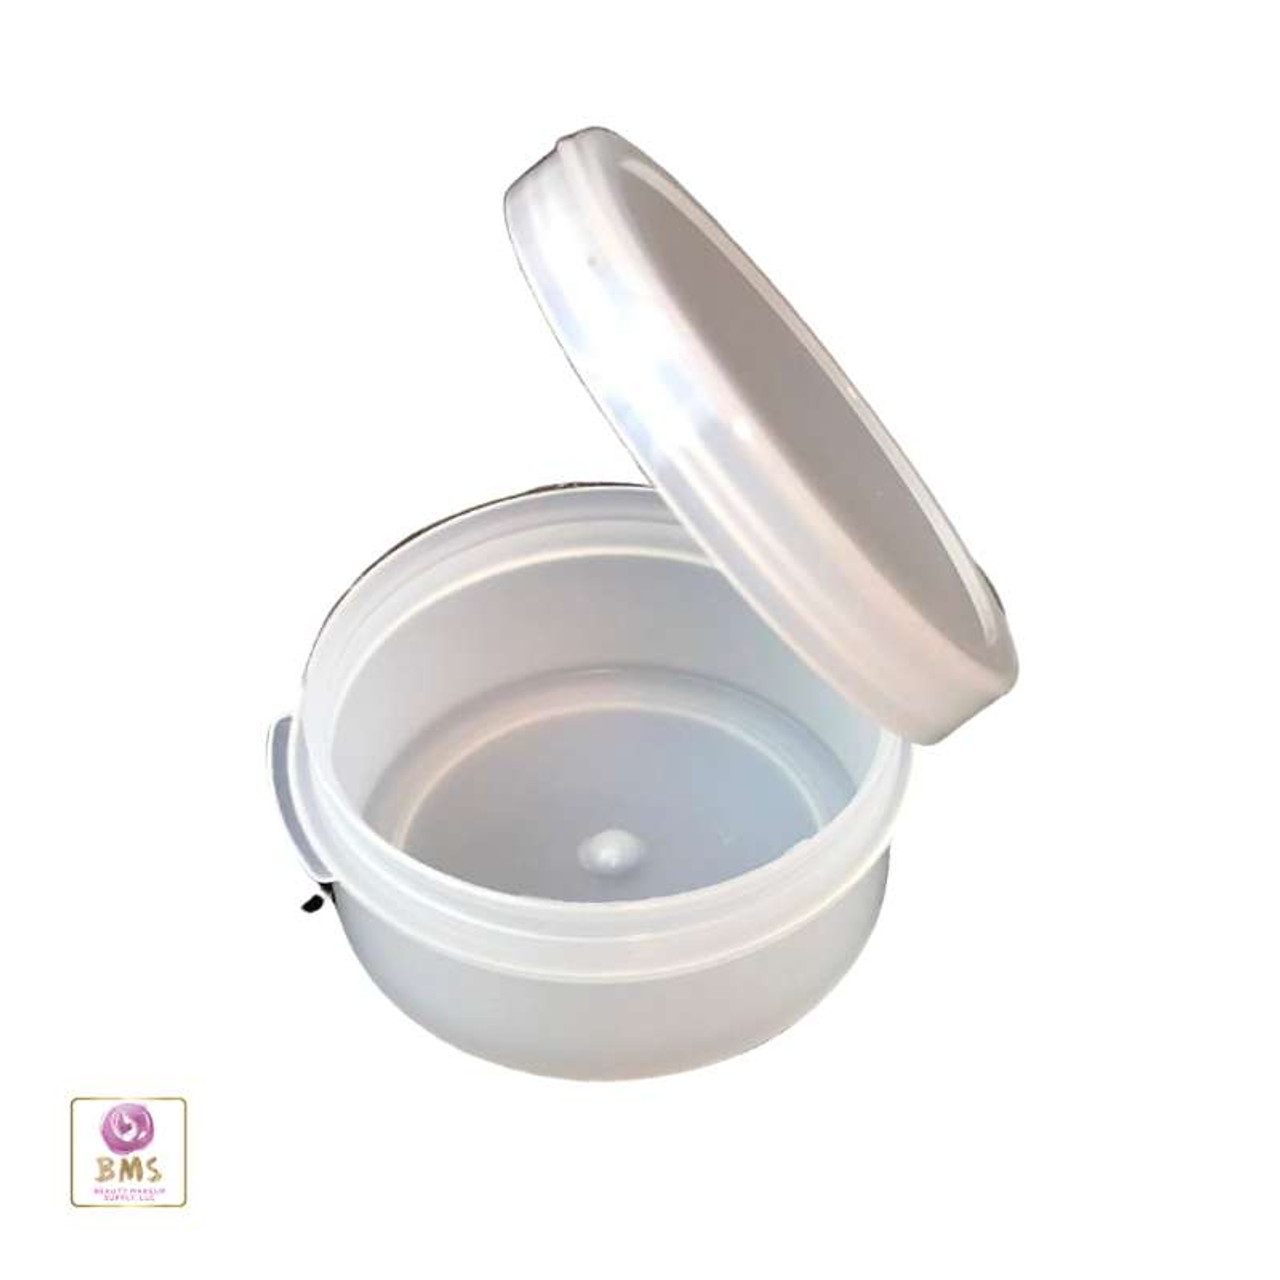 https://cdn11.bigcommerce.com/s-qd7k5gxi/images/stencil/1280x1280/products/270/6430/Cosmetic-Hinged-Lid-Jars-Beauty-Containers-10-Ml-Natural-White-Black-5098-5095-5099-Beauty-Makeup-Supply_5541__65057.1660976258.jpg?c=2?imbypass=on